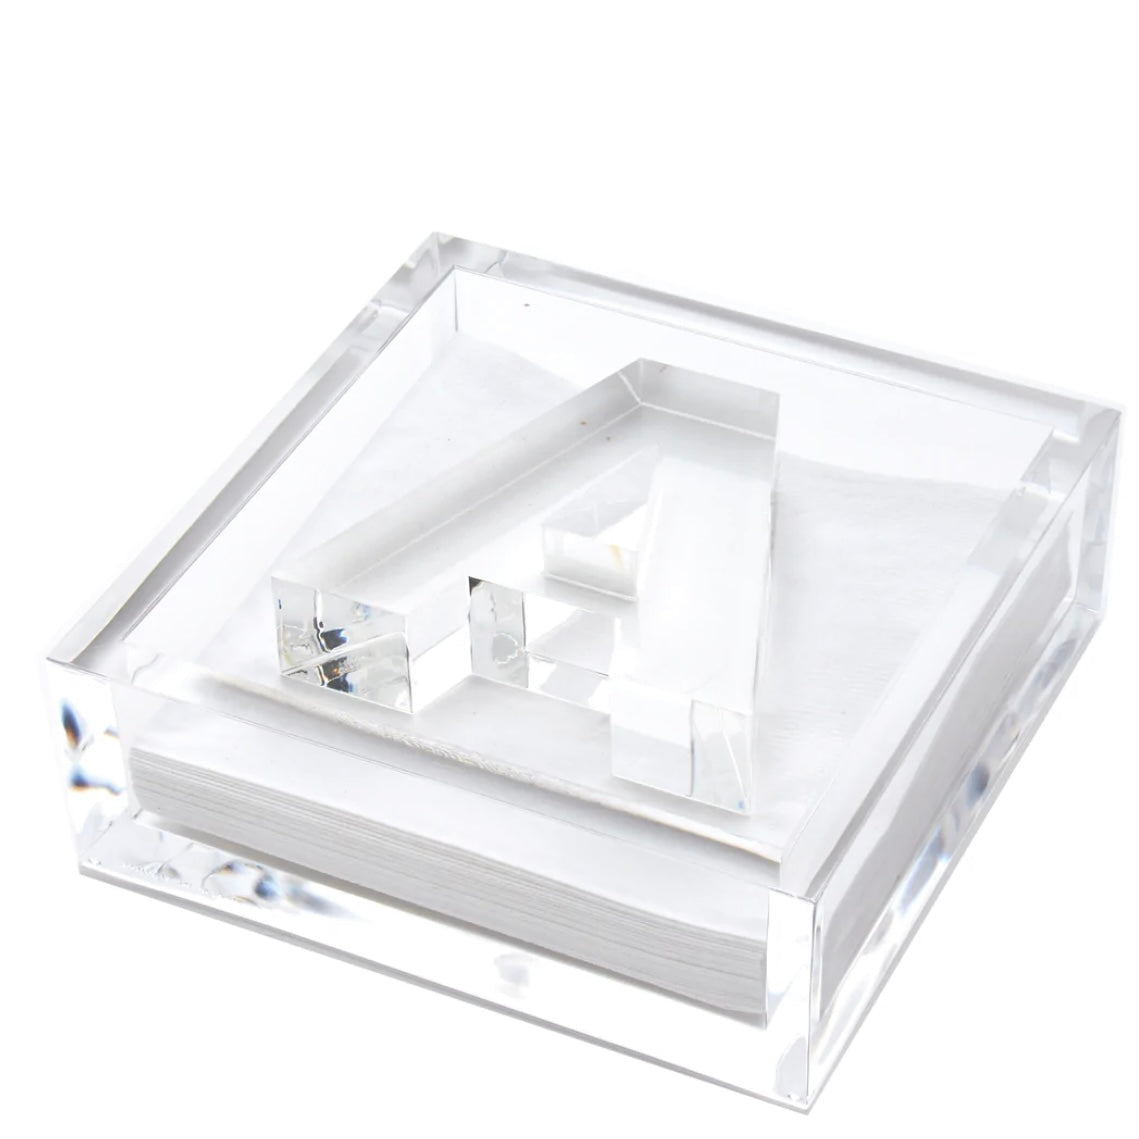 Initial Acrylic Cocktail Napkin Holder & Weight